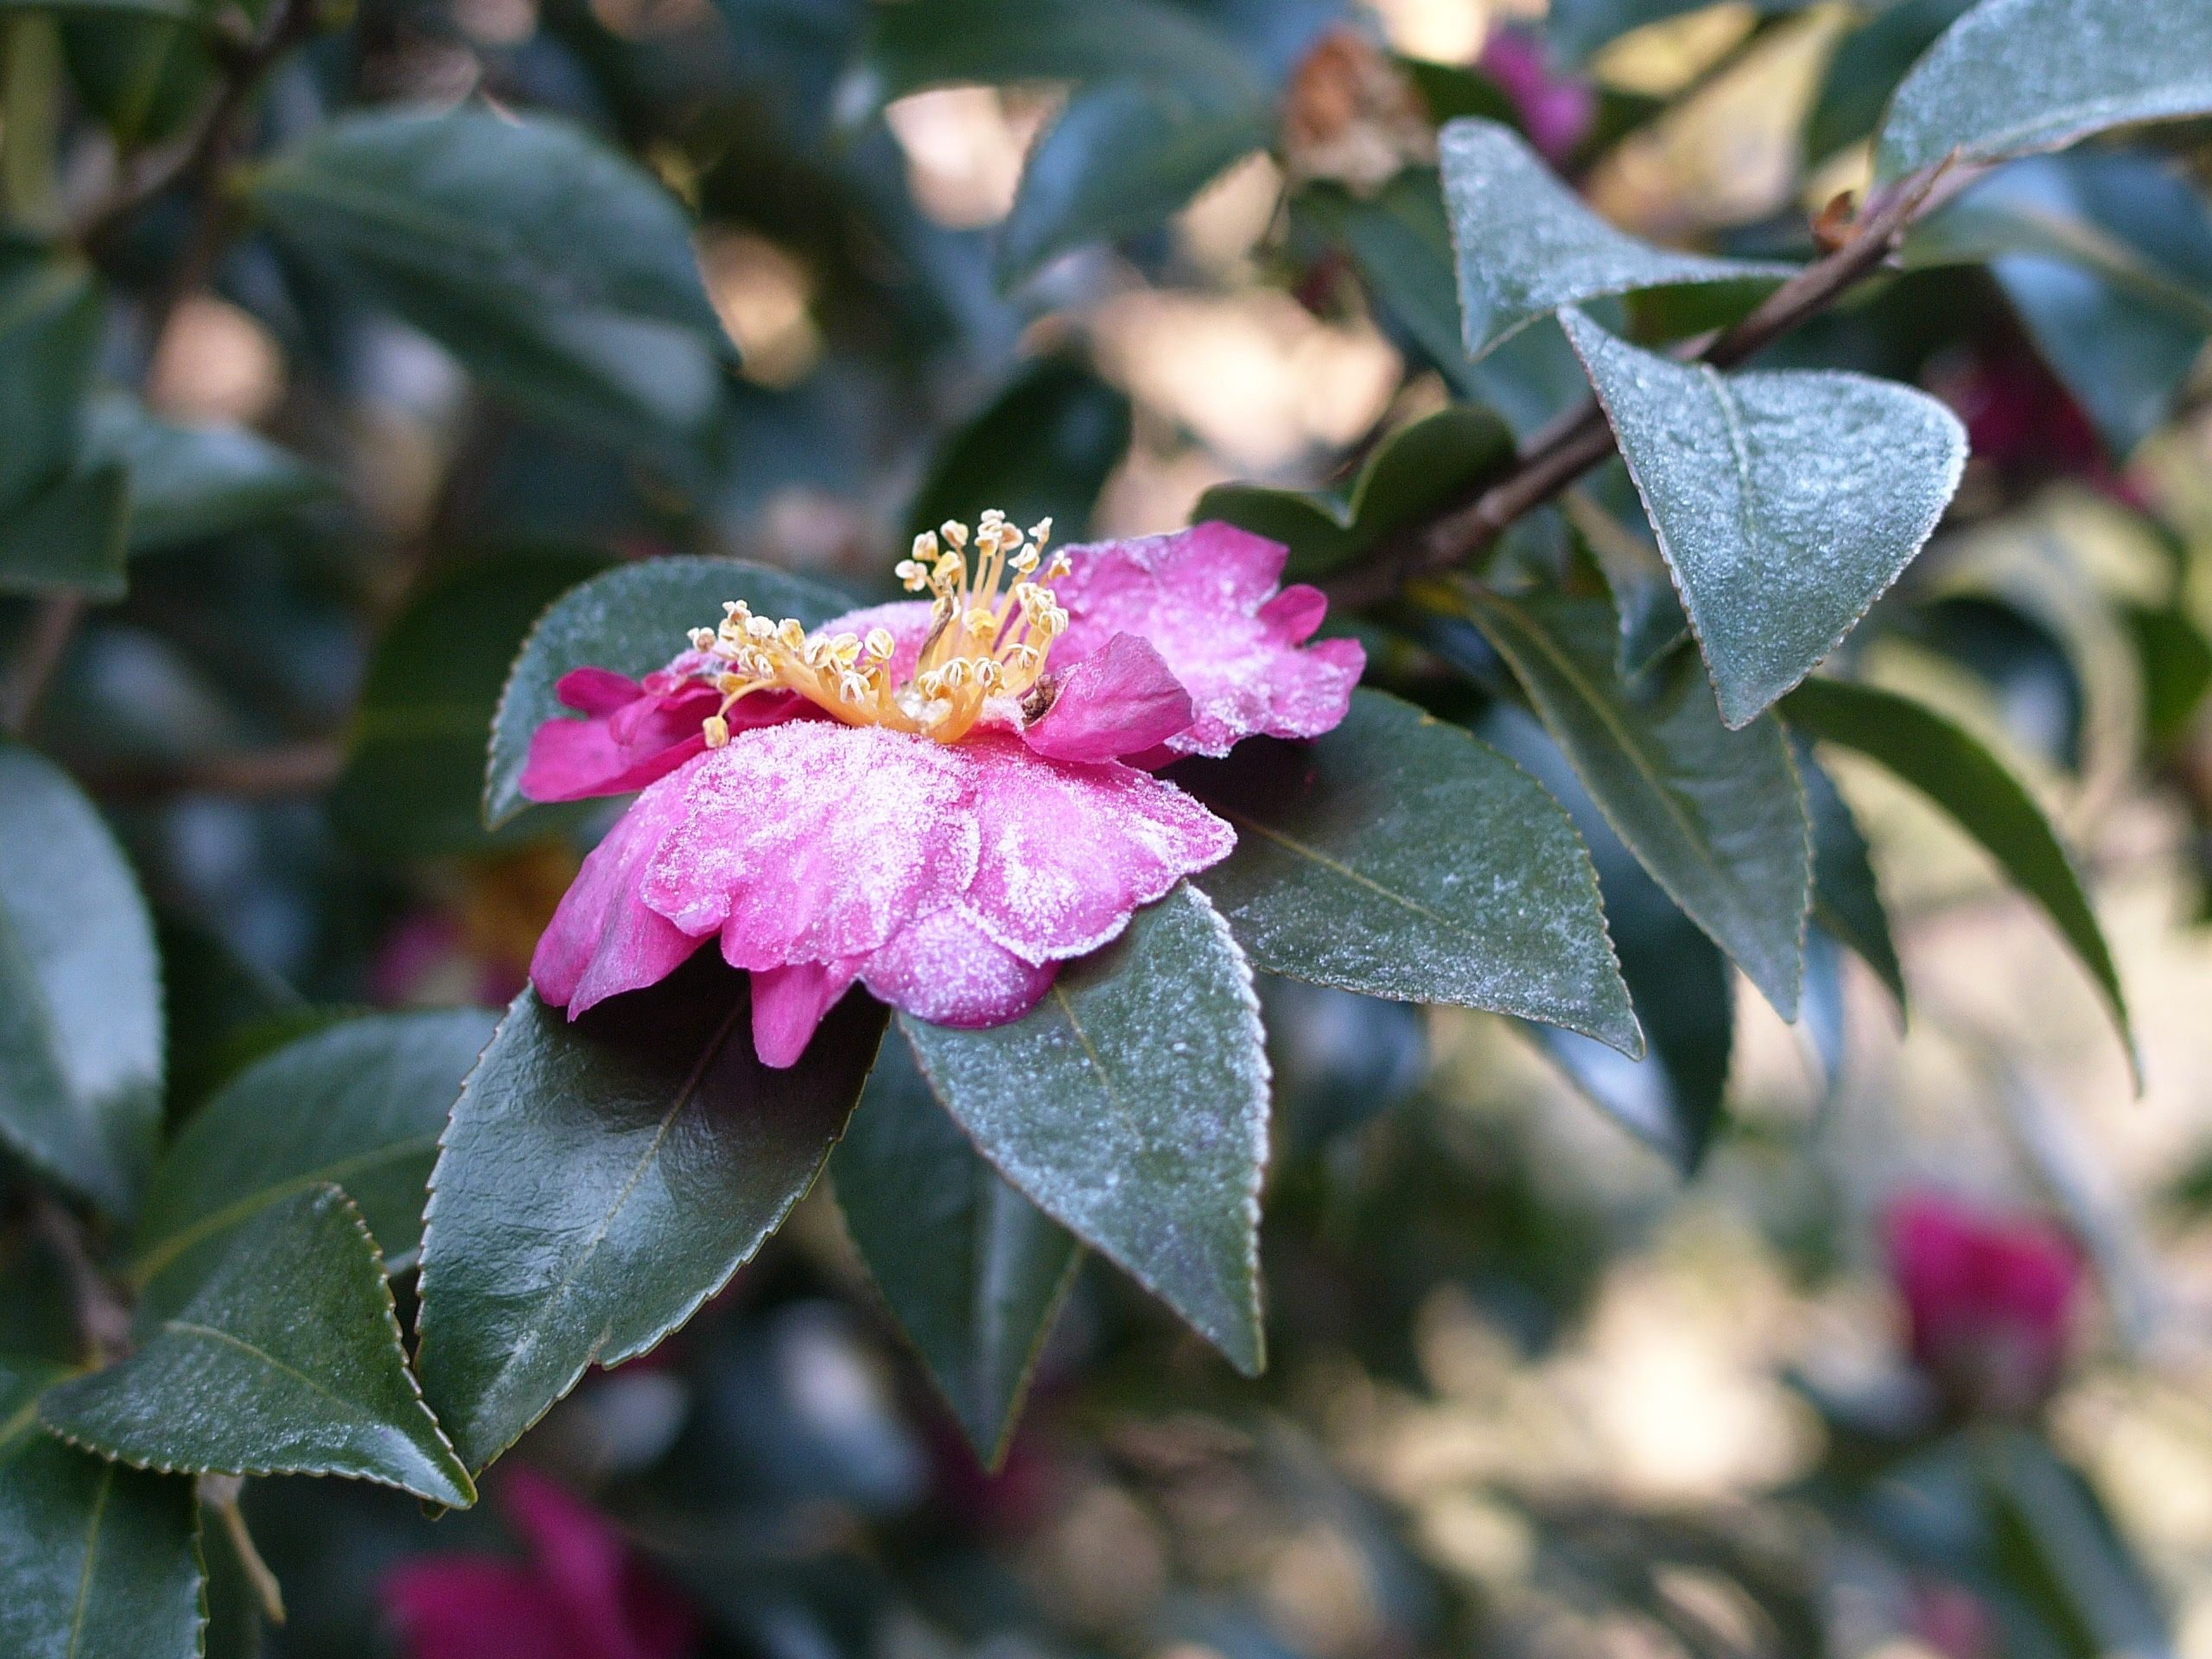 Closeup of a camellia flower dusted with ice.